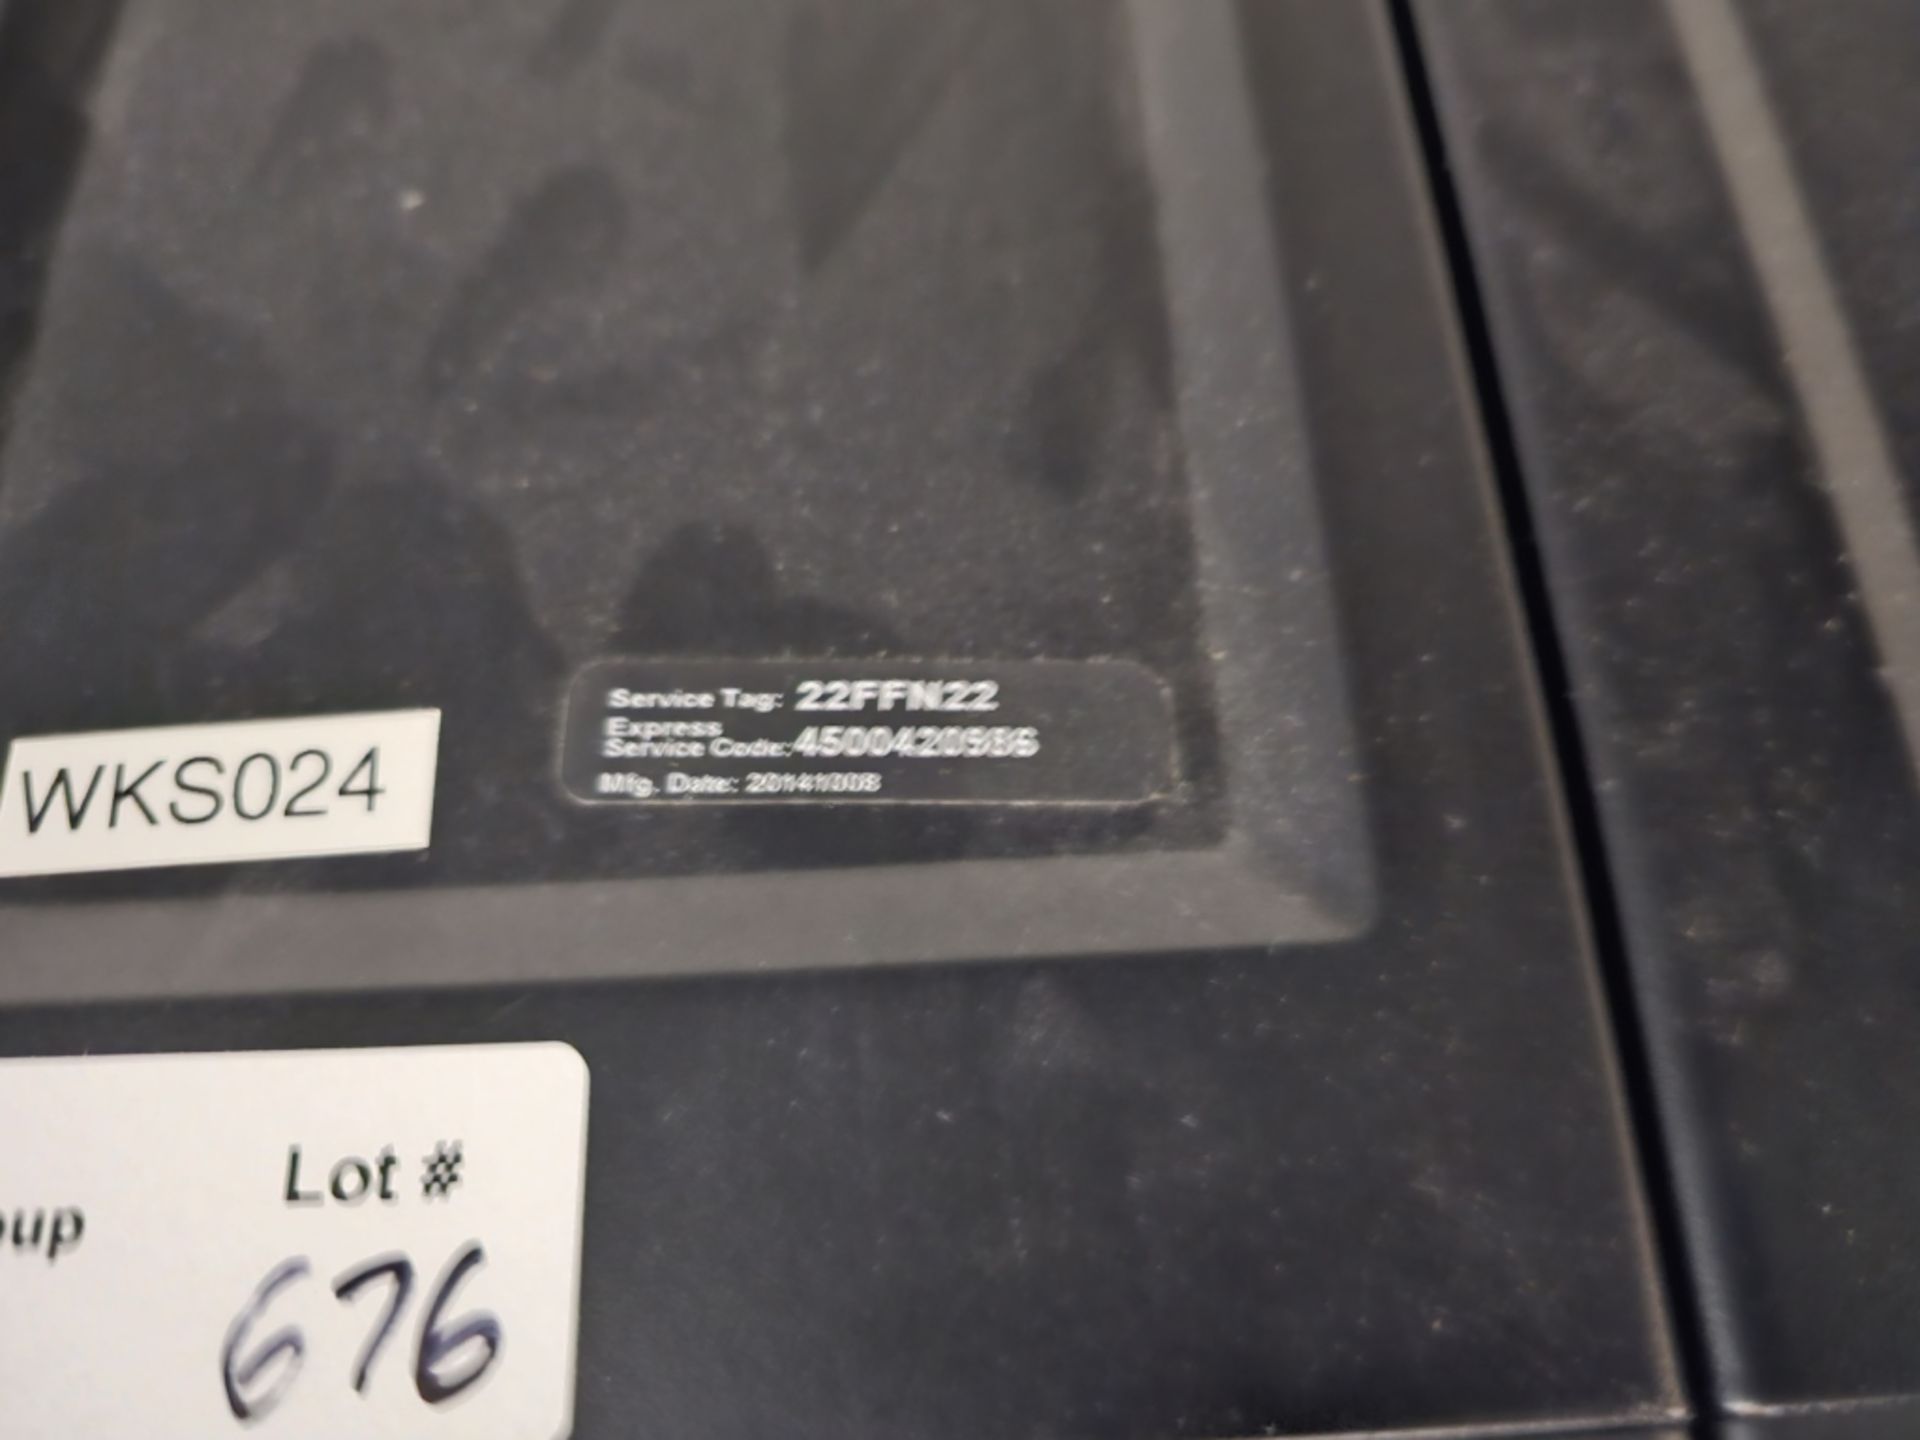 (4) Dell Optiplex 3020 i5 PC's Service Tag Numbers 22DSN22, 22FFN22, 22CDN22, 22HDN22 - Image 3 of 5